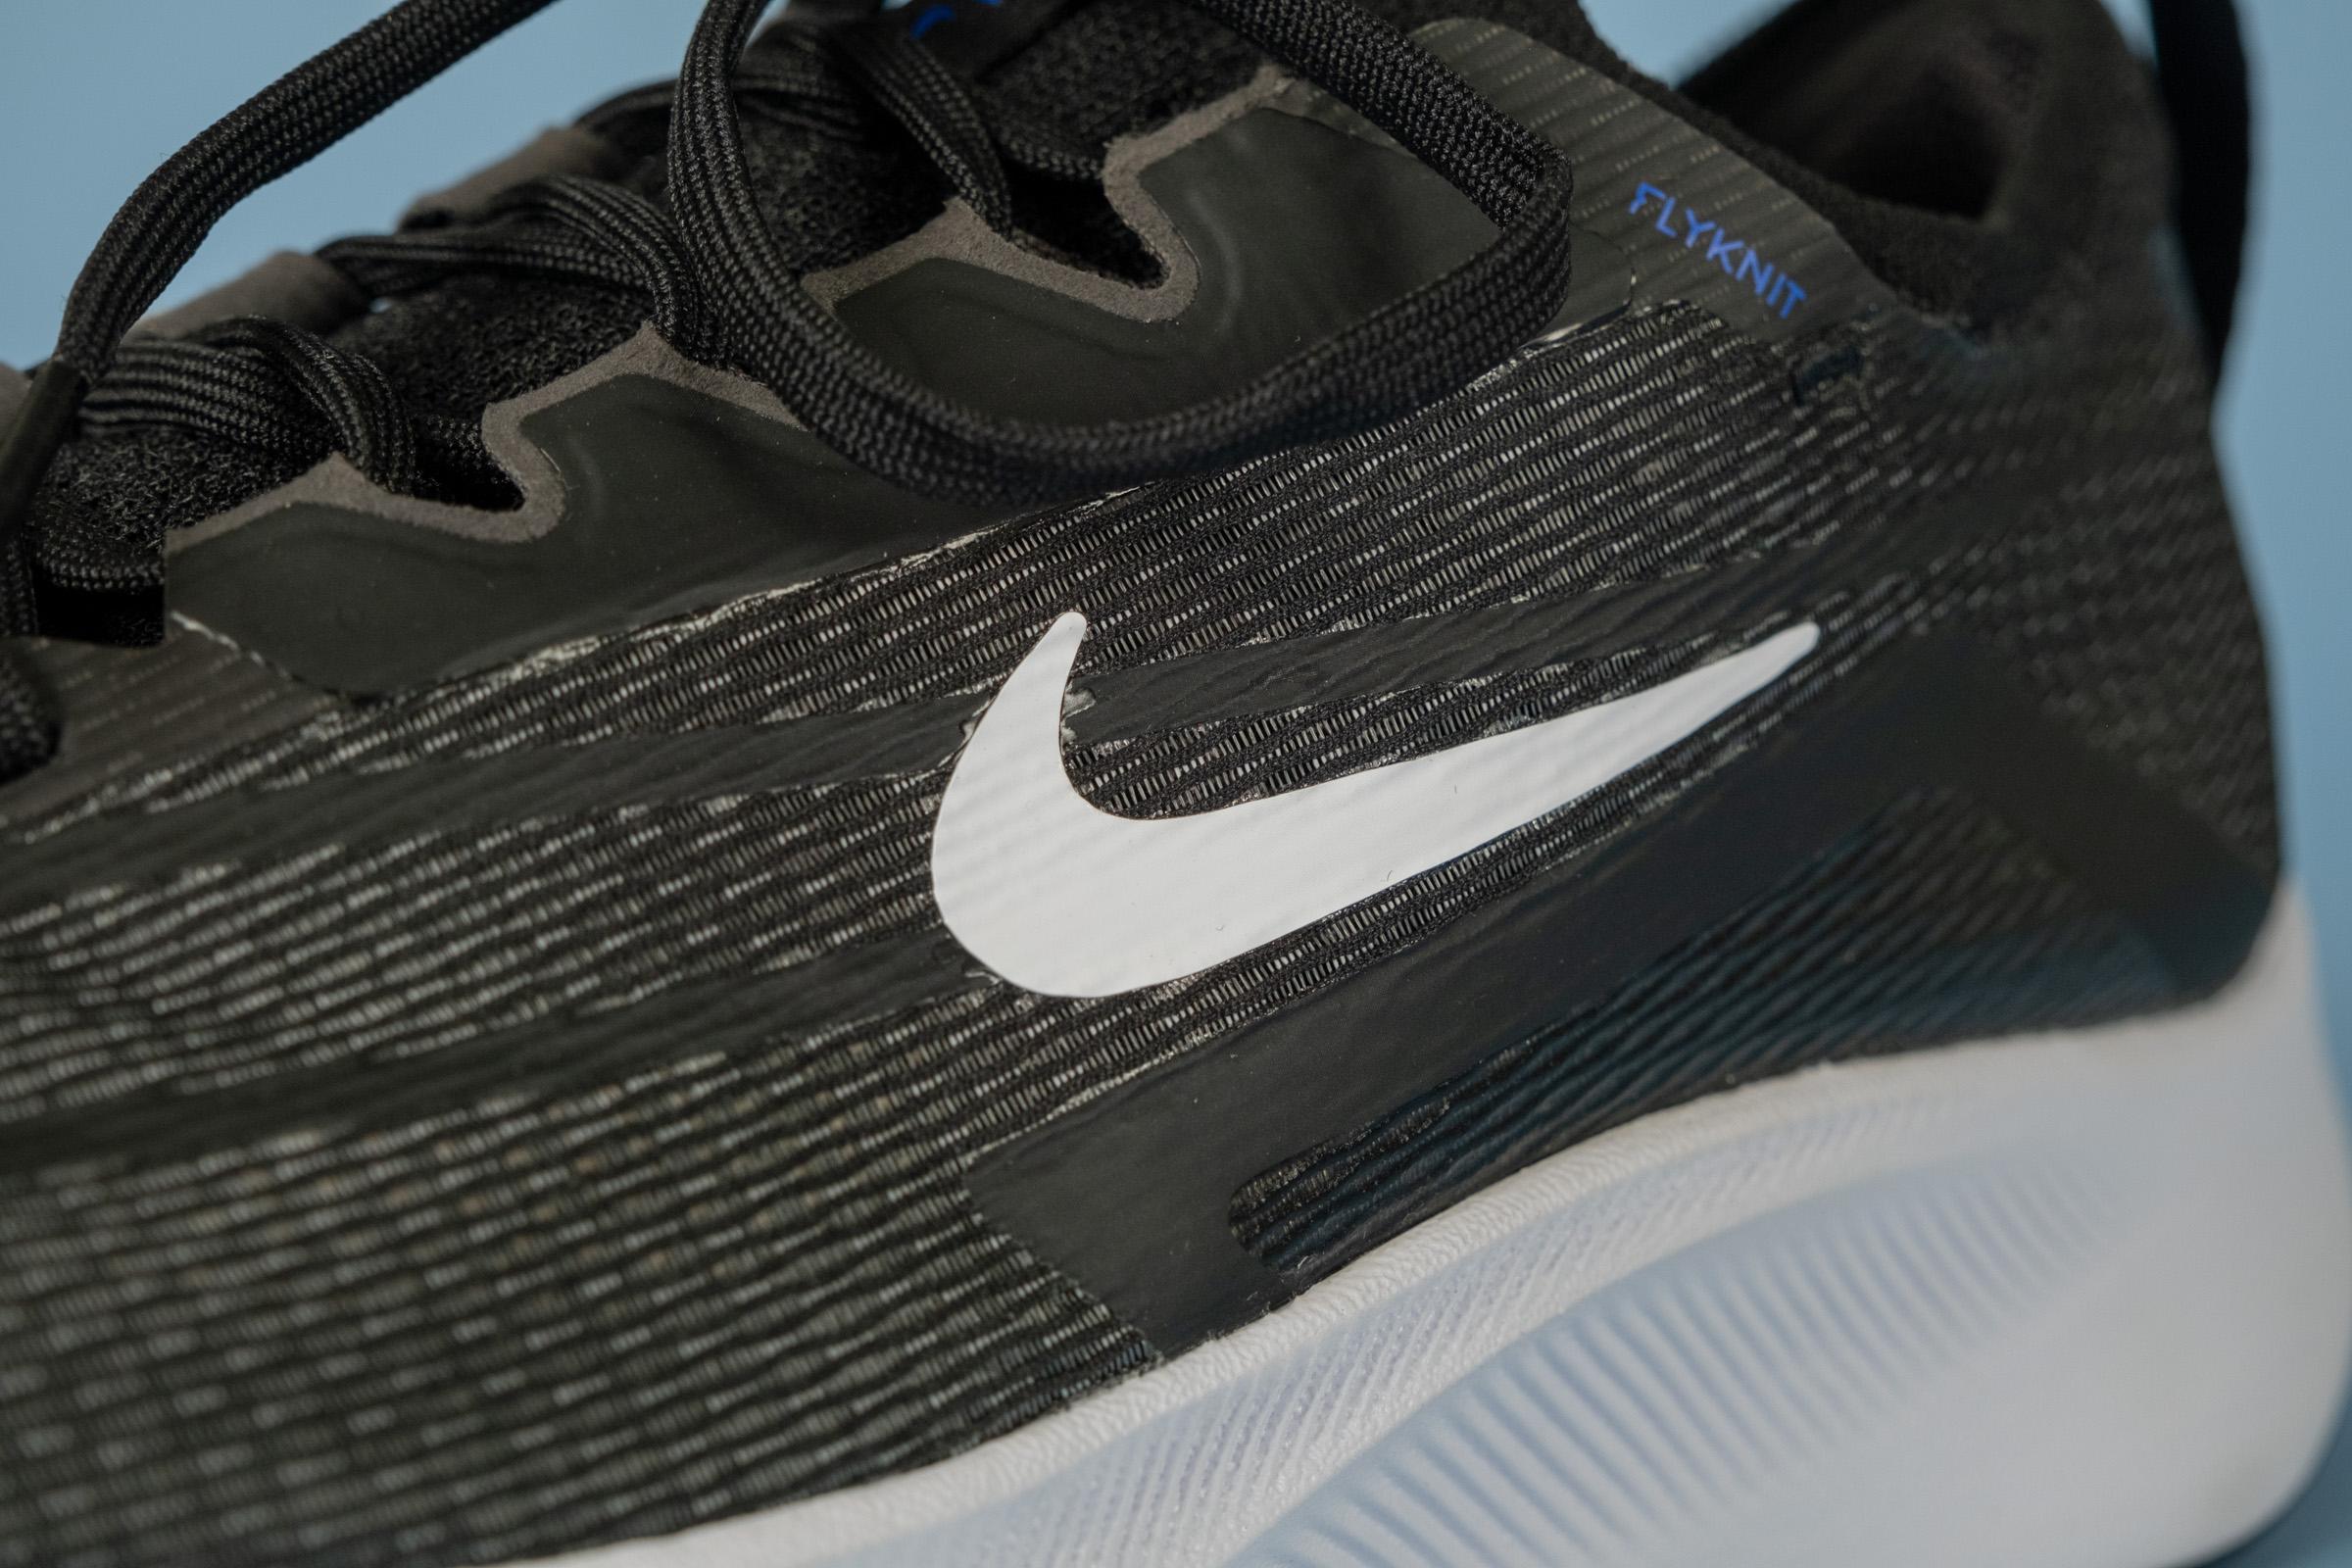 Nike Zoom Fly 4 Review